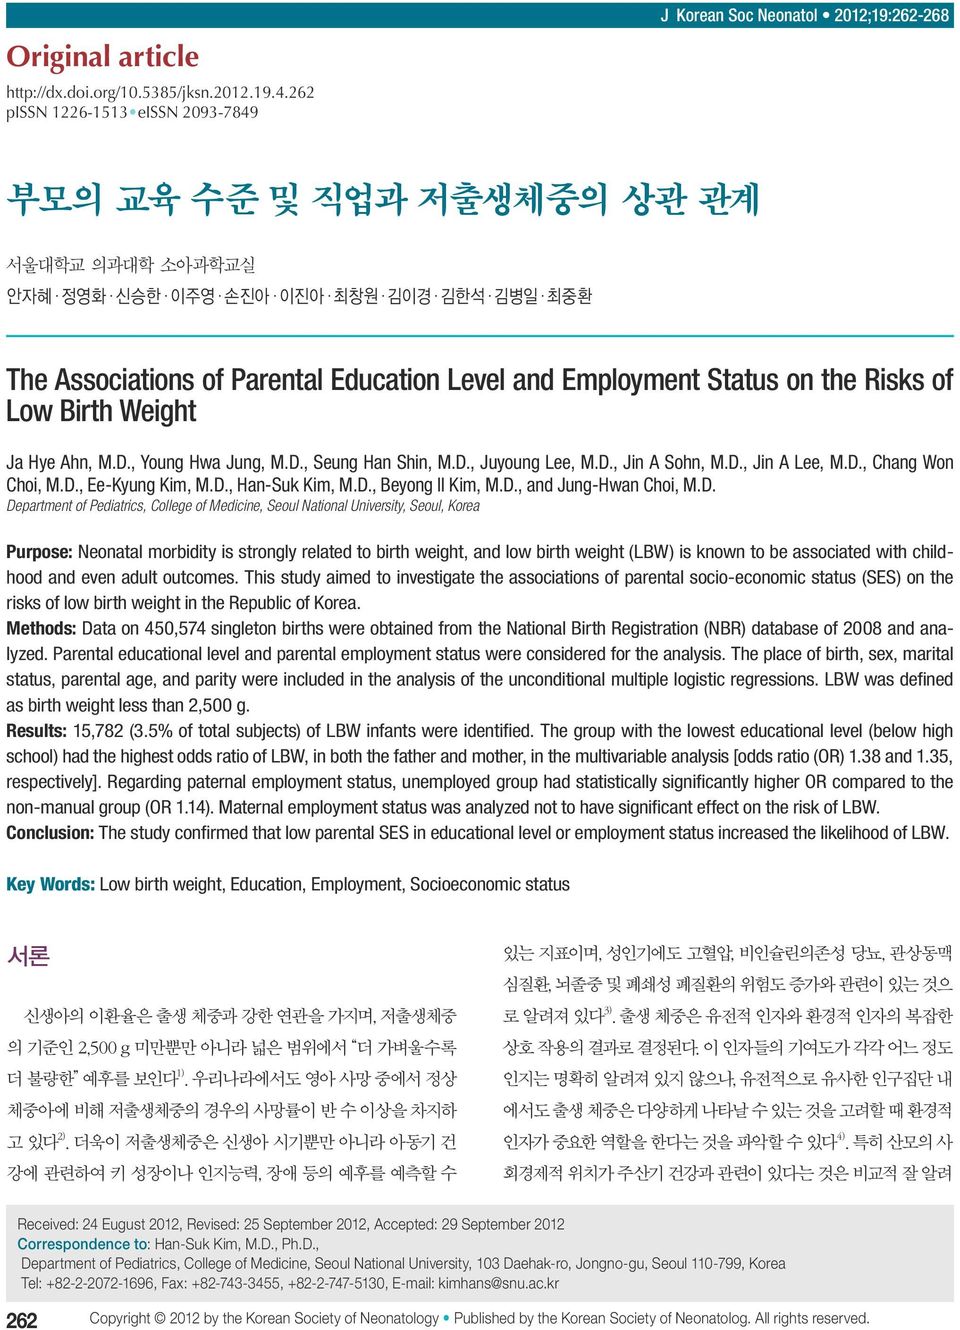 Education Level and Employment Status on the Risks of Low Birth Weight Ja Hye Ahn, M.D., Young Hwa Jung, M.D., Seung Han Shin, M.D., Juyoung Lee, M.D., Jin A Sohn, M.D., Jin A Lee, M.D., Chang Won Choi, M.